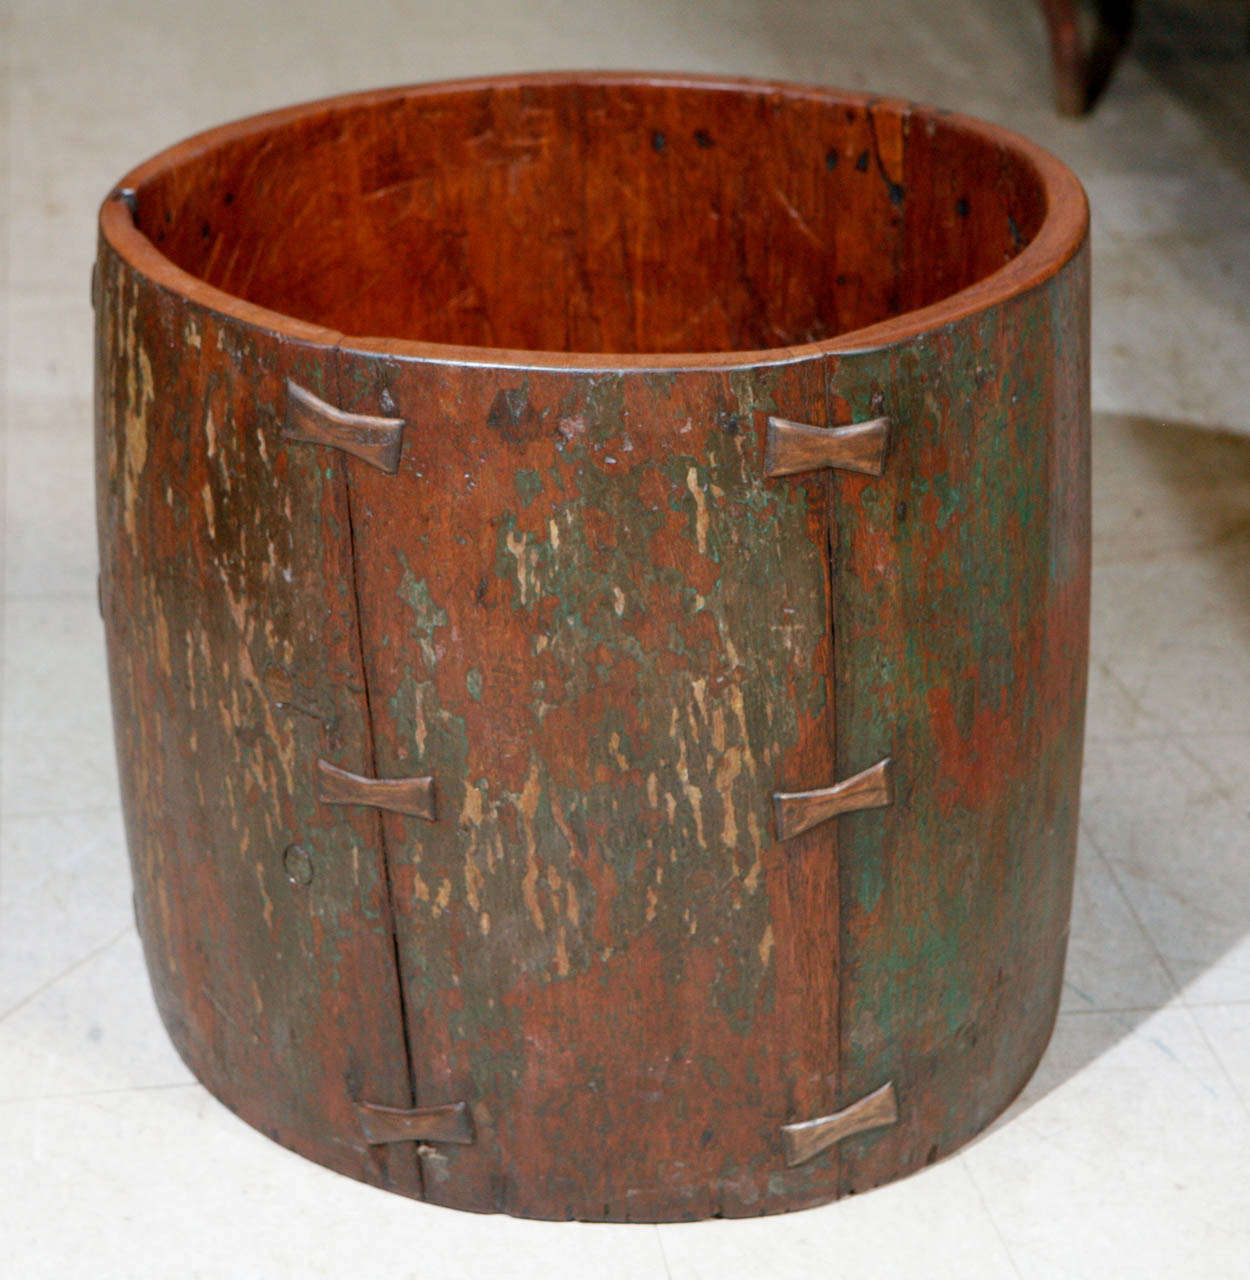 Antique teak hardwood drum vessel of a cylindrical form with twelve butterfly insert, rural Java, circa 1900.